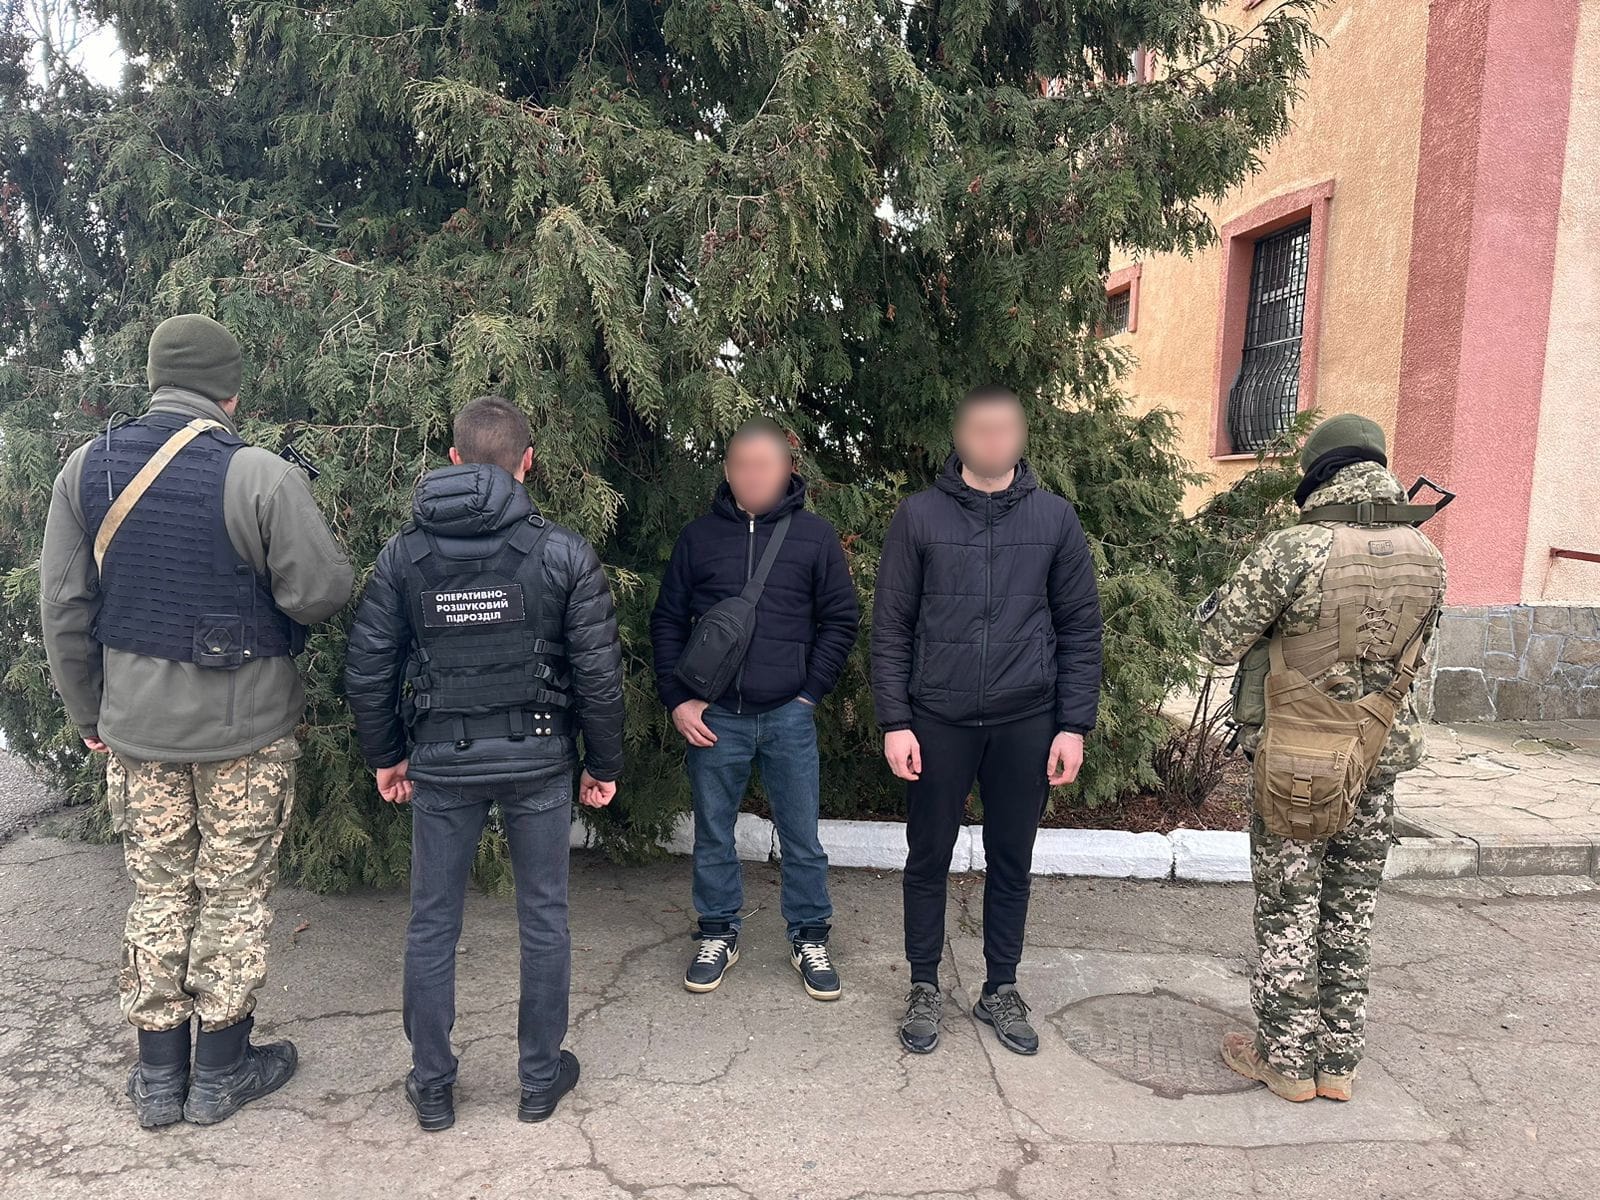 In the Chernivtsi region, border guards detained two men who were trying to illegally enter Romania.